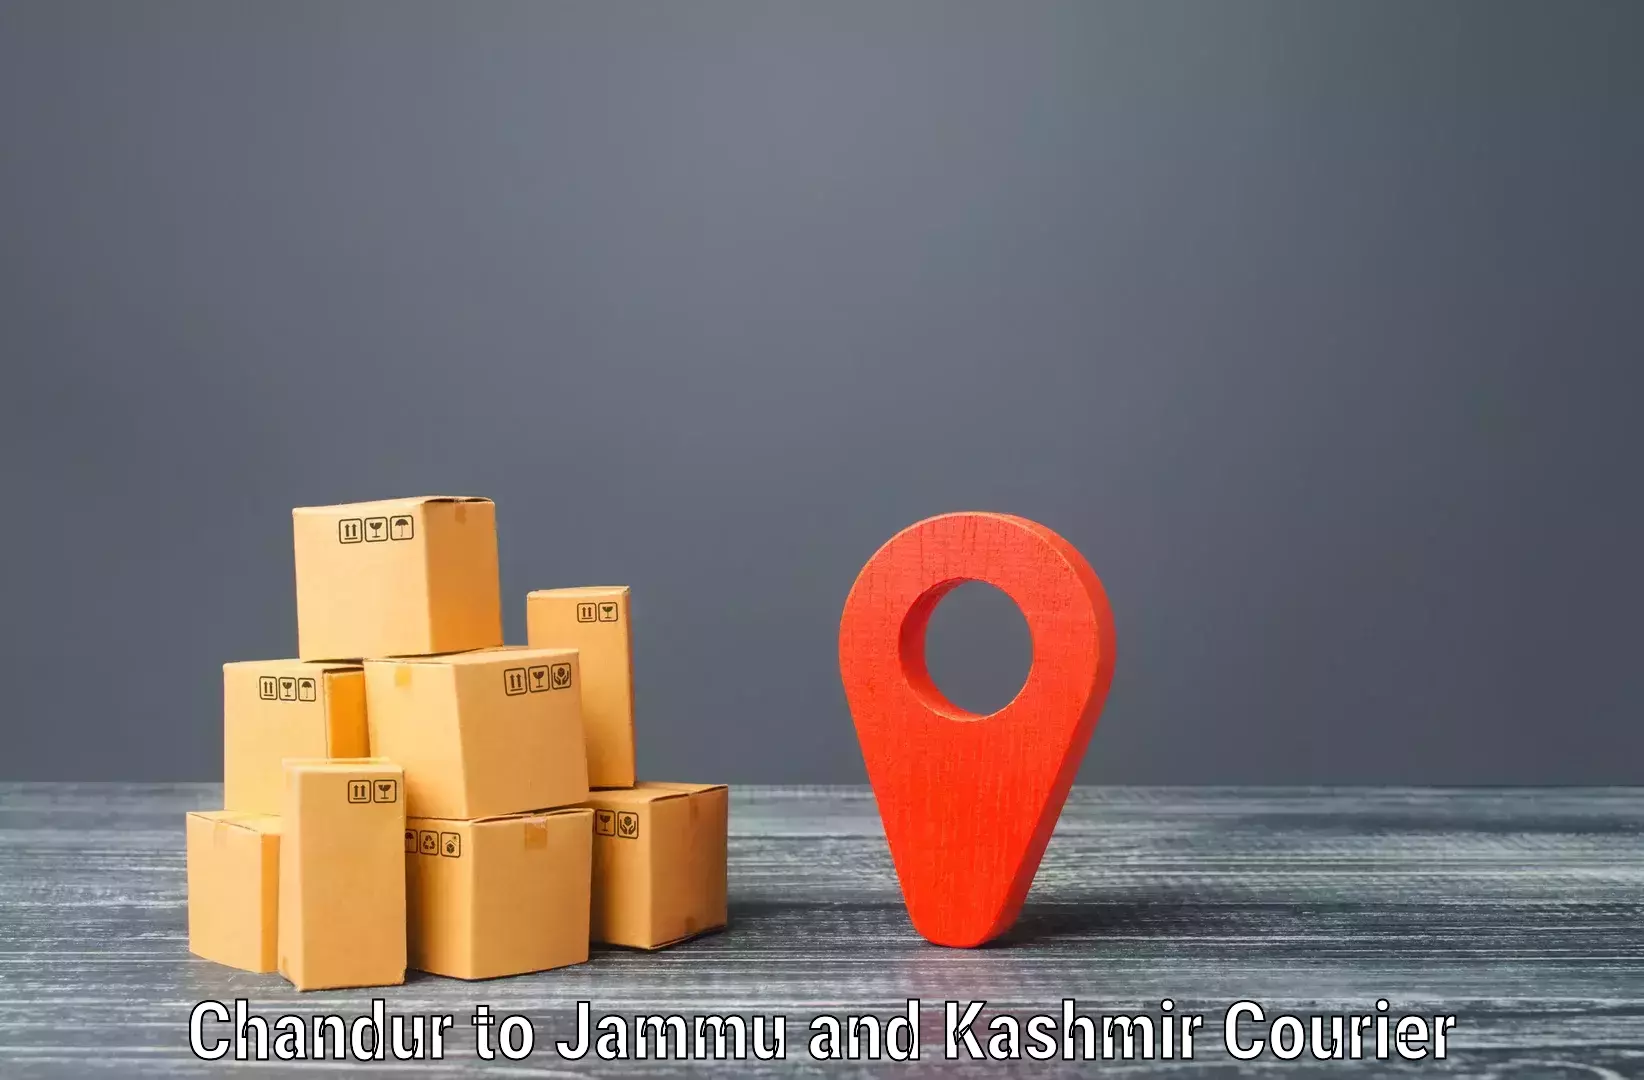 Easy return solutions in Chandur to Poonch